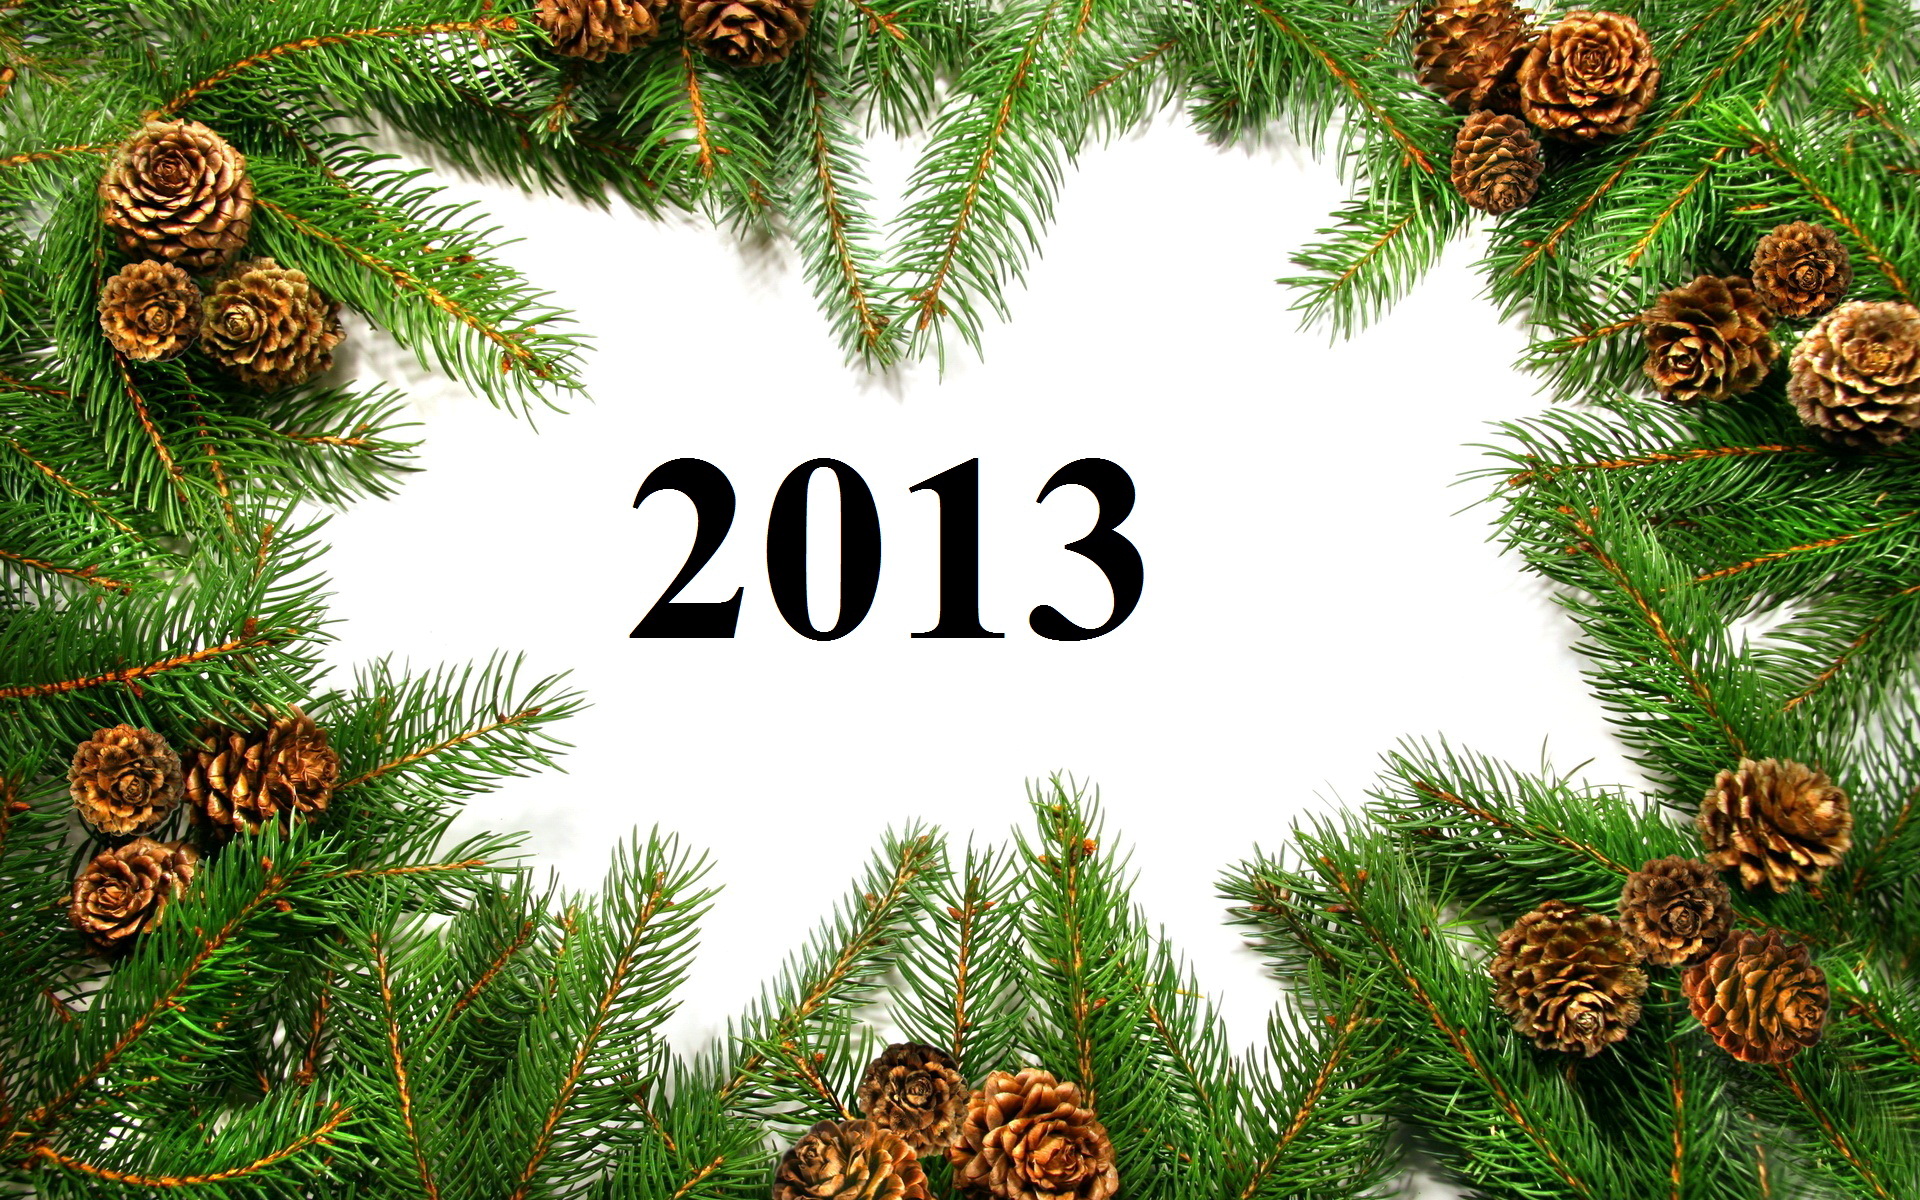 Holiday New Year 2013 1920x1200